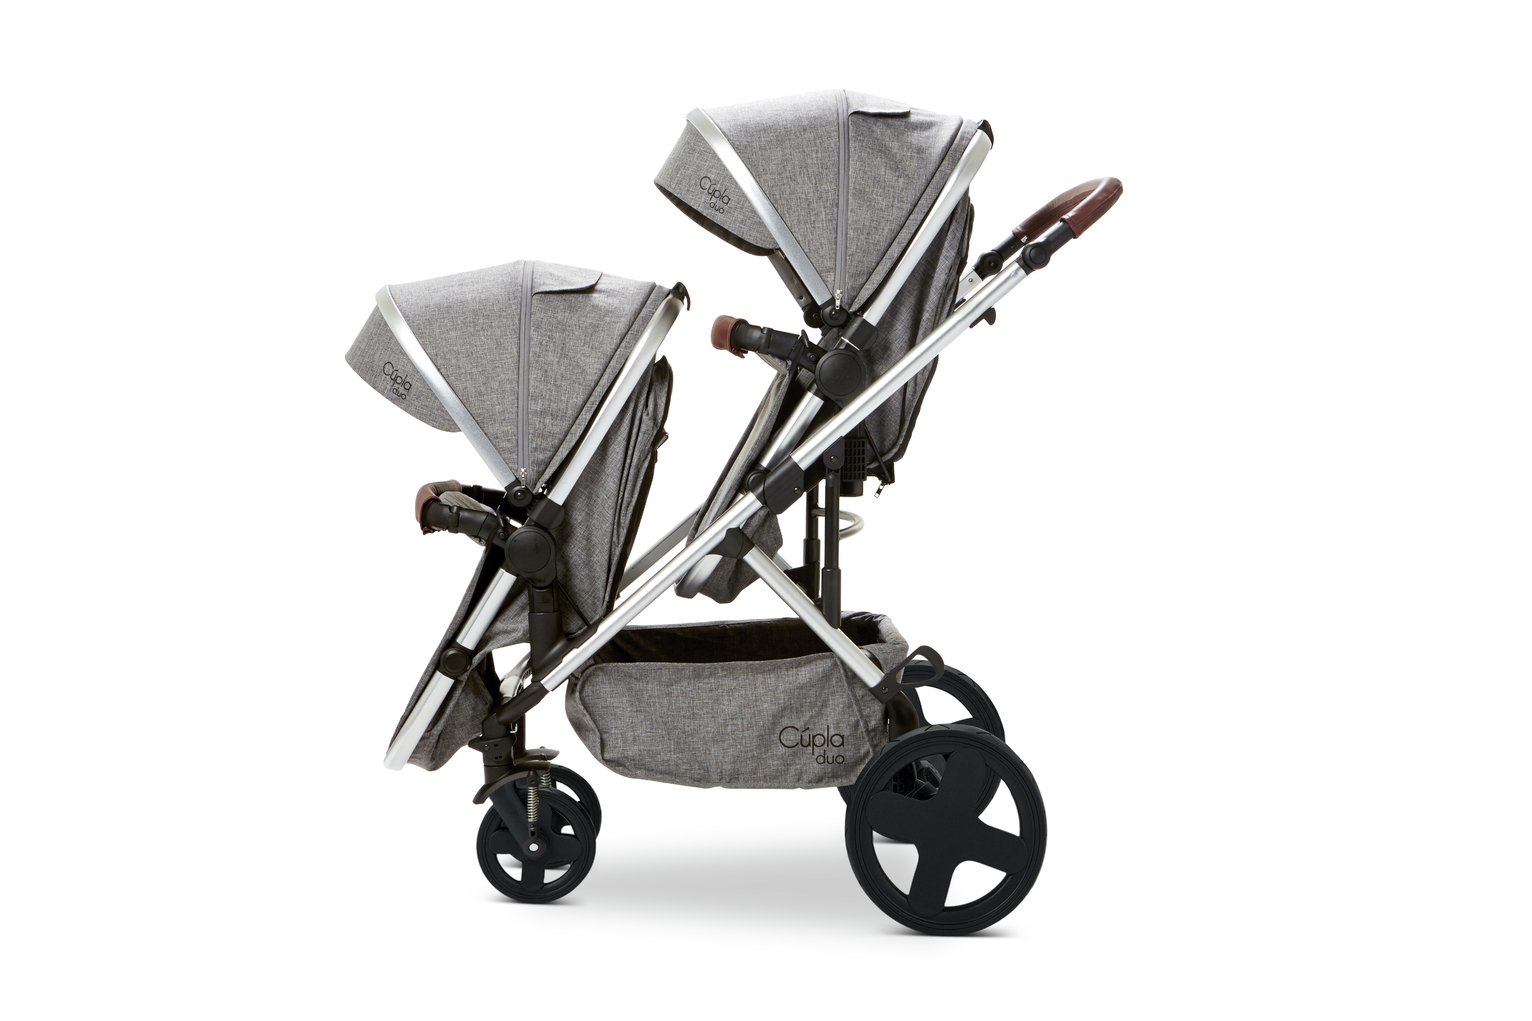 Baby Elegance Culpa Twin Travel System Review